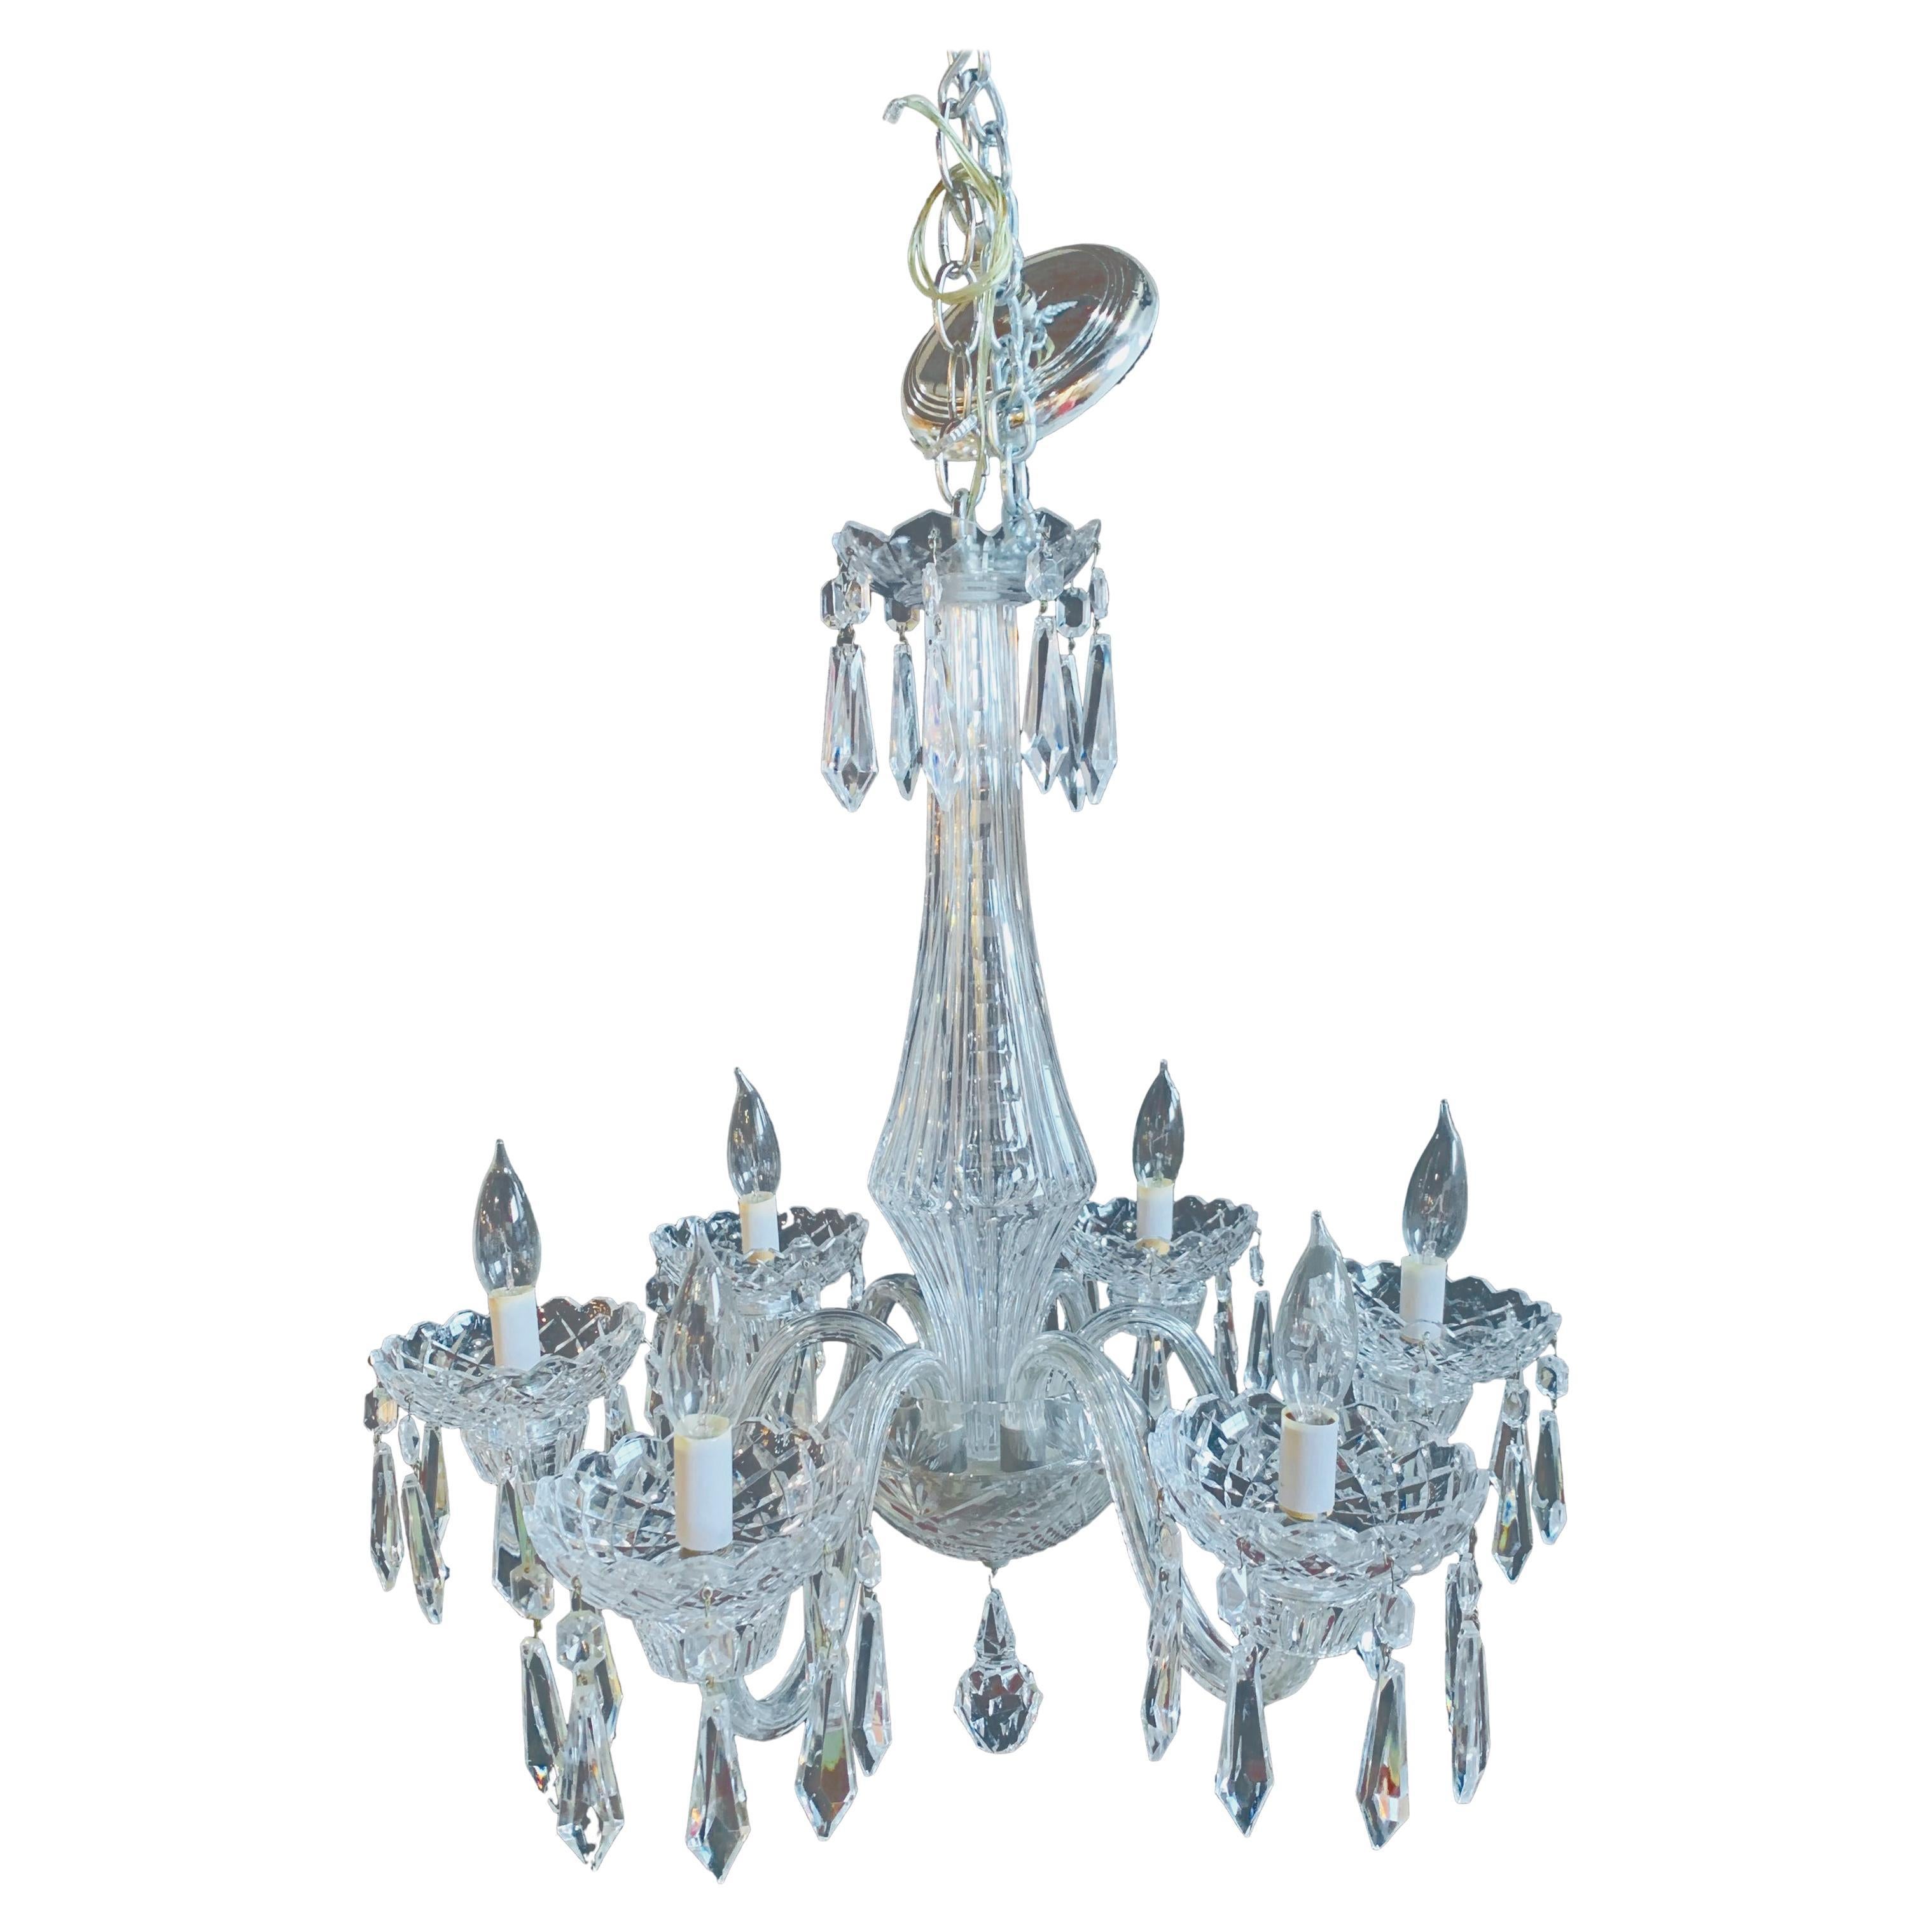 Stamped "Waterford" Six-Light Art Deco Style Crystal Chandelier